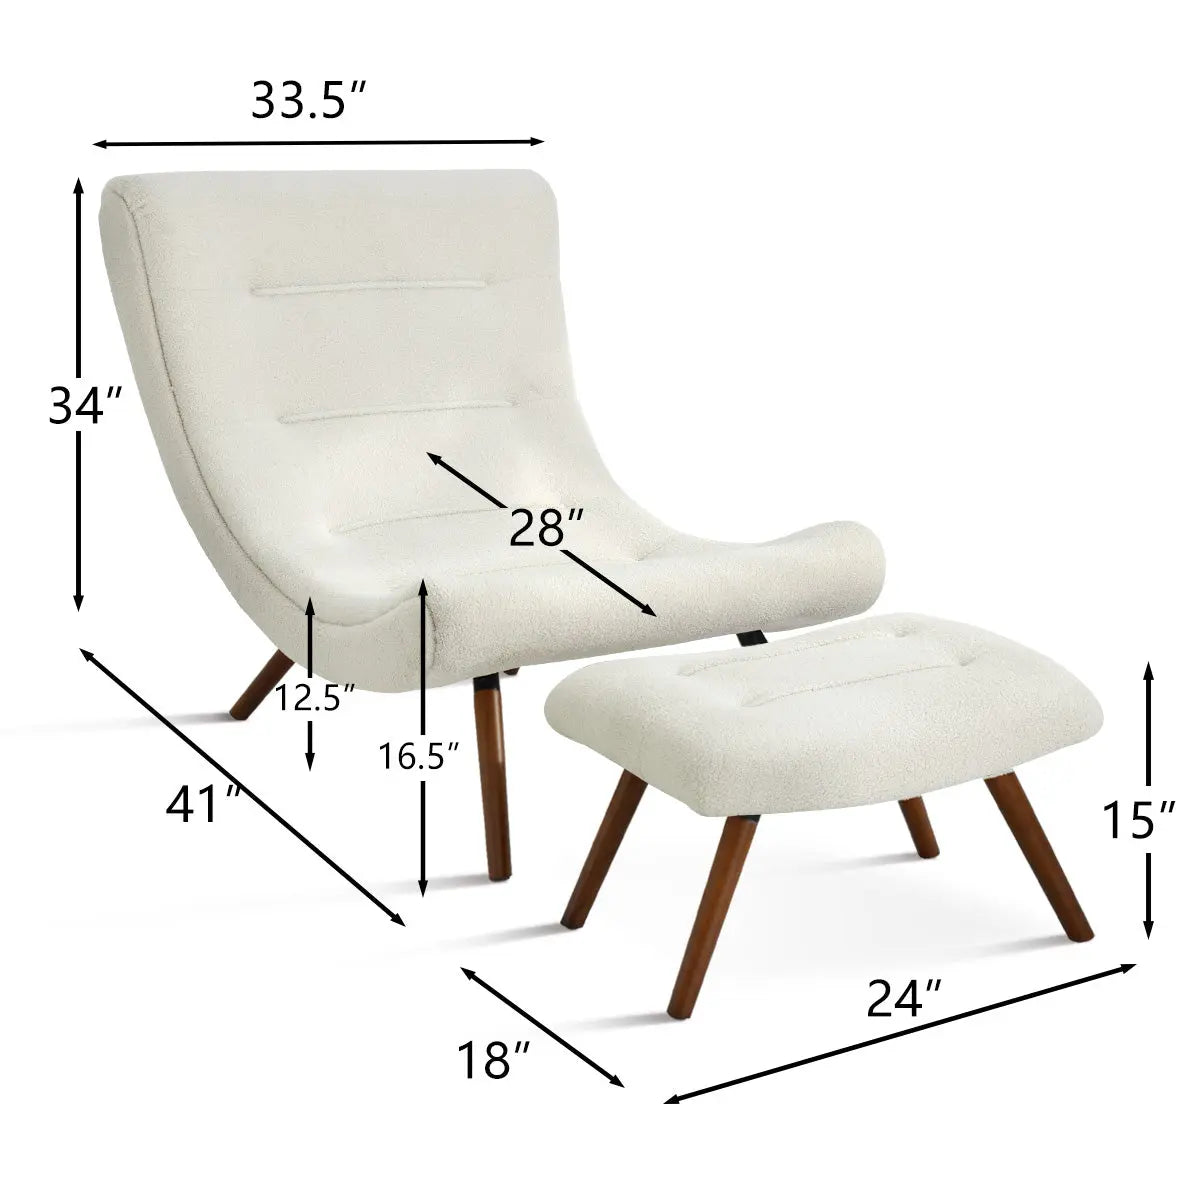 Jupiter 33.5 High Back Wide White Faux Shearling Lounge Lounge Chair  Chaise and Ottoman Foot Rest Set-The Pop Maison